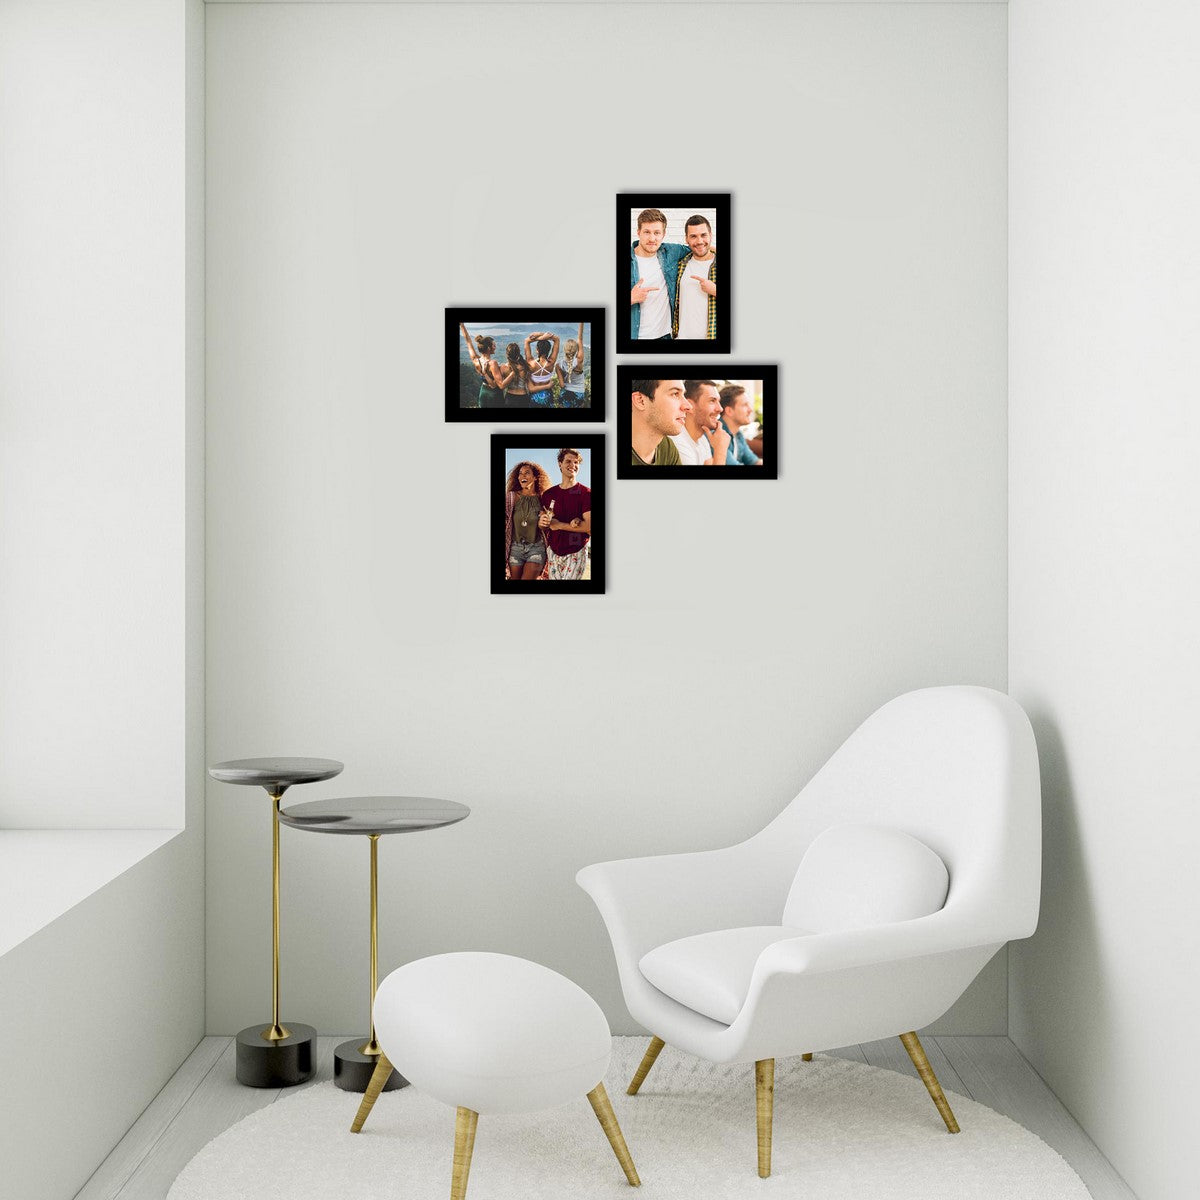 Memory Wall Collage Photo Frame - Set of 4 Photo Frames for 4 Photos of 5"x7" 2